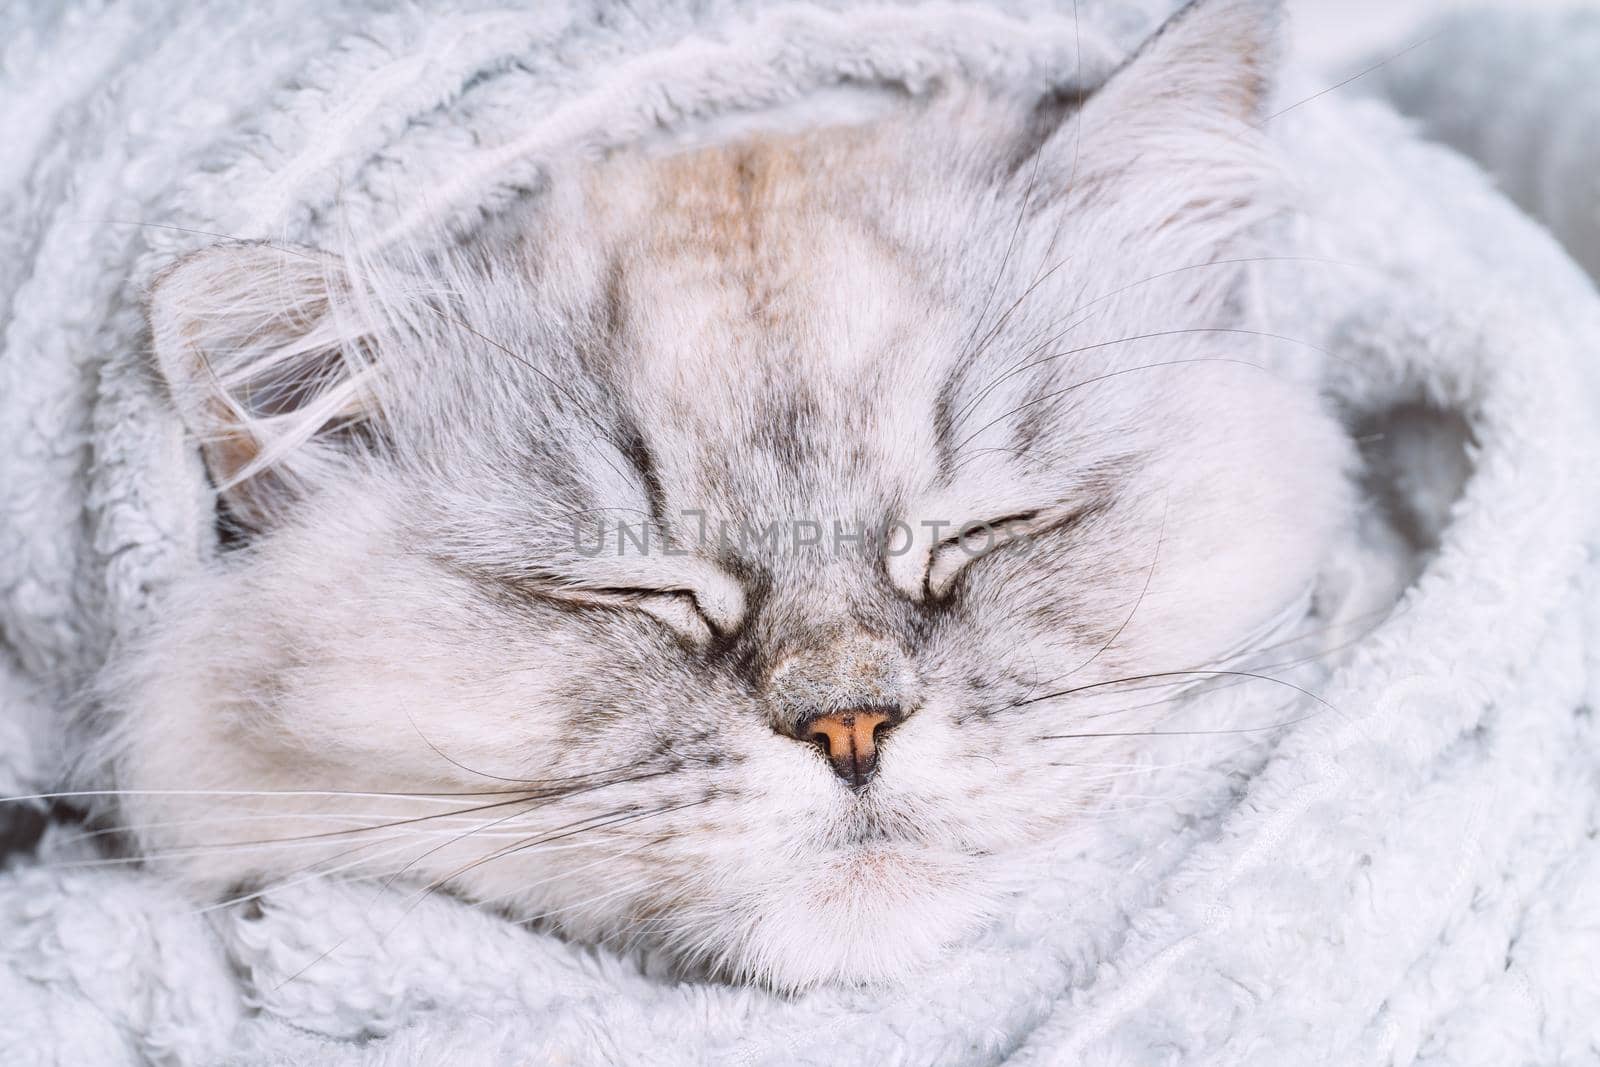 Cute grey persian cat sleeping or napping in cozy soft blanket. Cat warming under a plaid. Greeting card concept by DariaKulkova